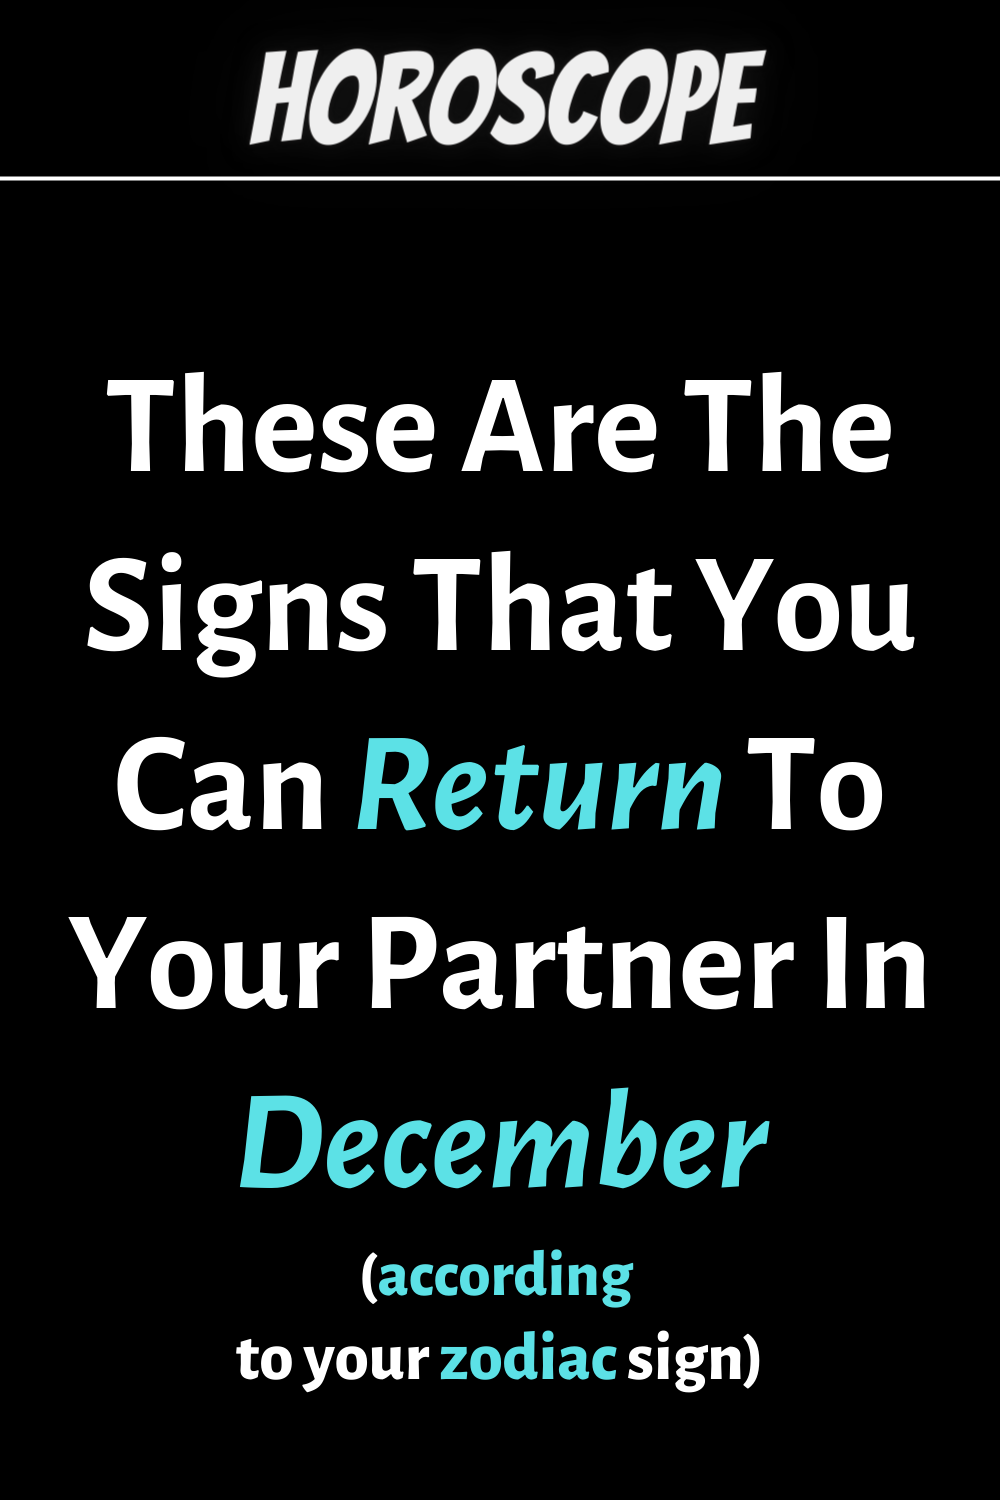 These Are The Signs That You Can Return To Your Partner In December